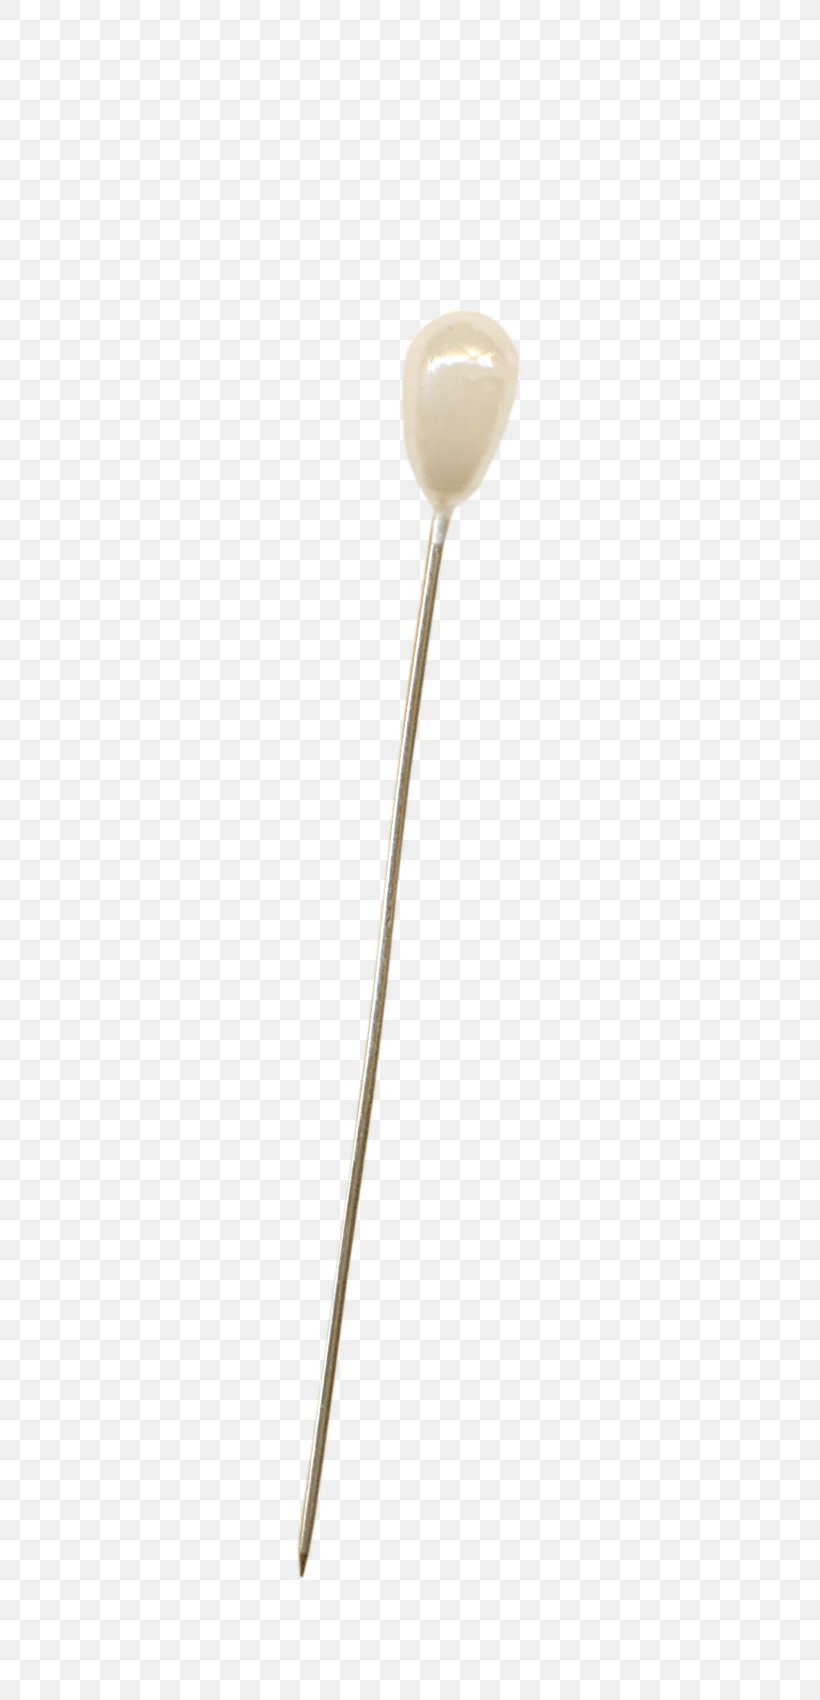 Wooden Spoon, PNG, 500x1700px, Wooden Spoon, Cutlery, Spoon, Tableware Download Free